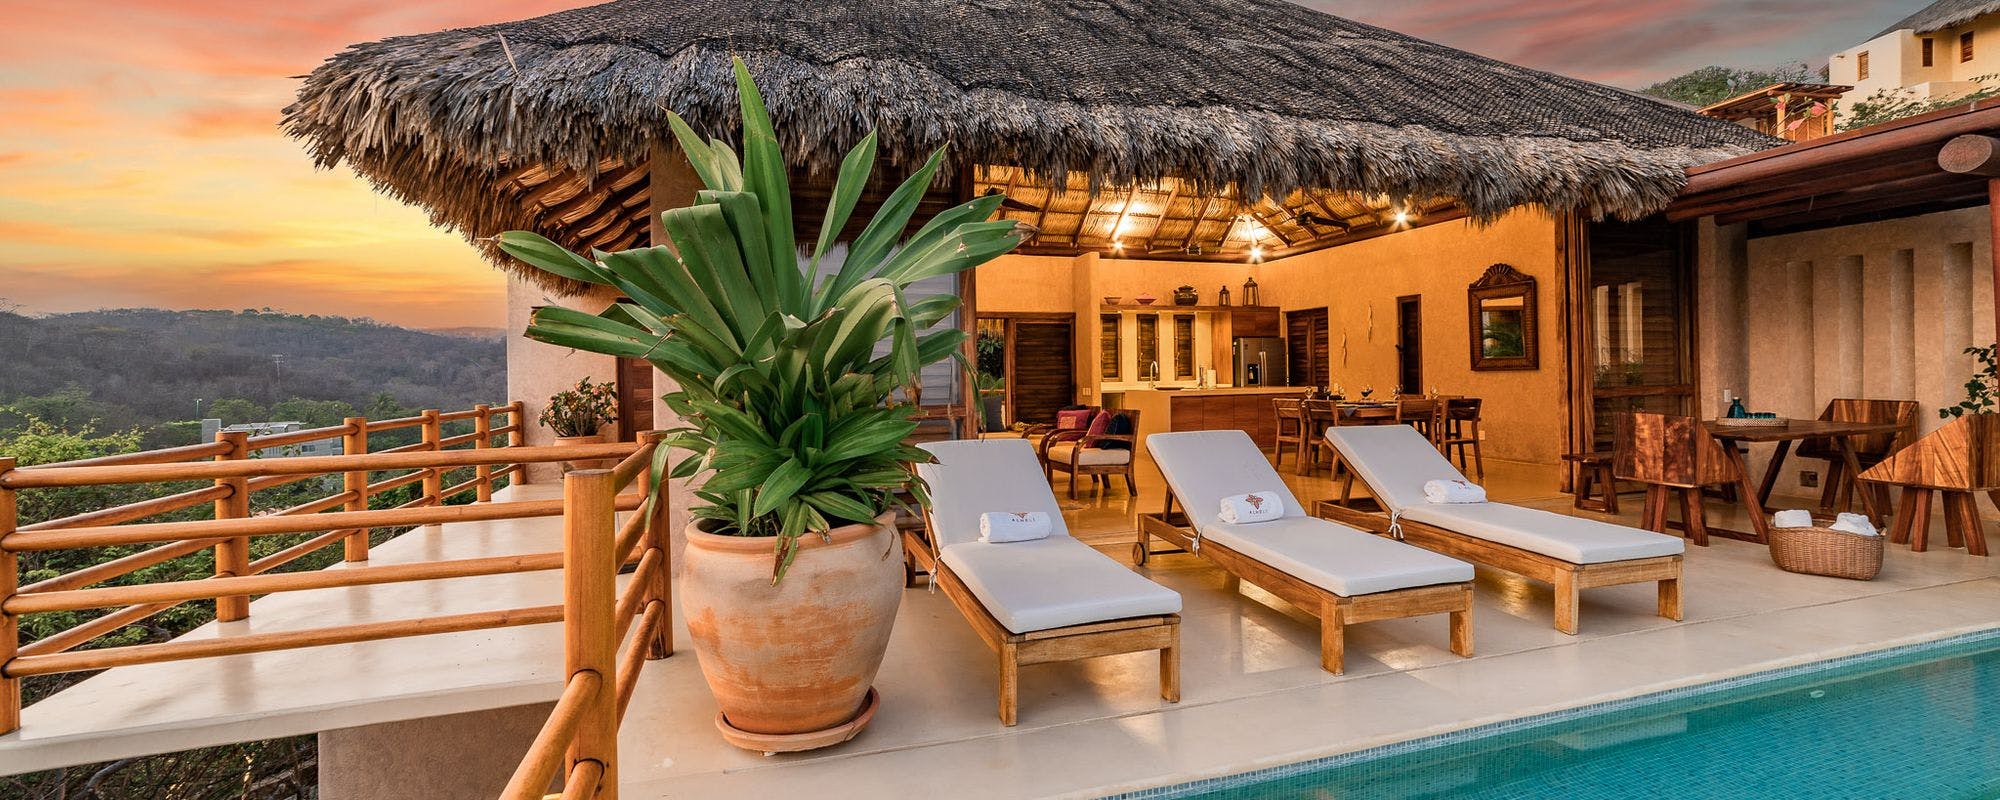 Outdoor living space at a Huatulco vacation rental